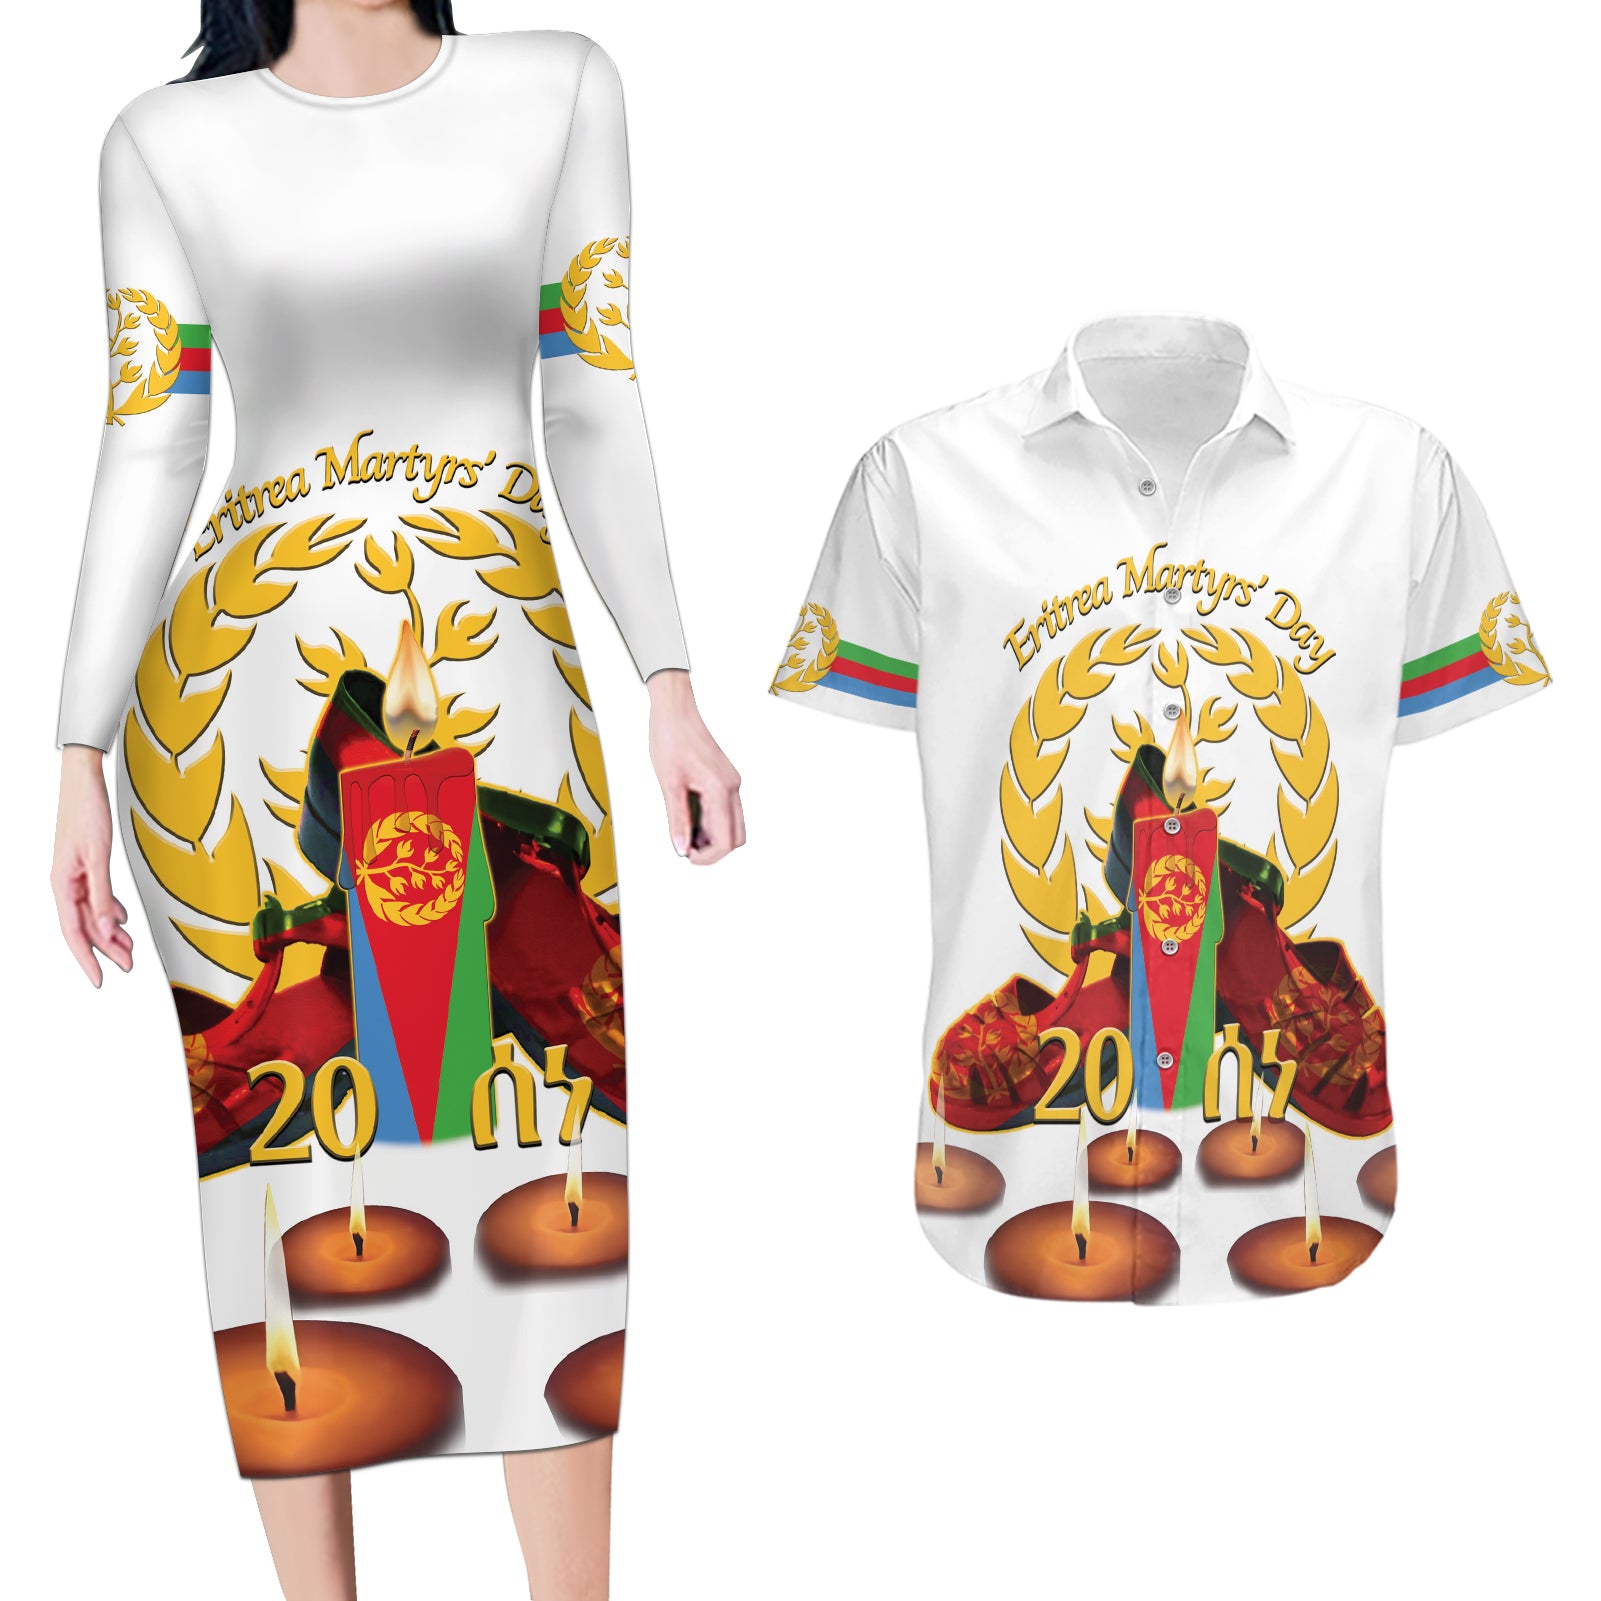 Custom Eritrea Martyrs' Day Couples Matching Long Sleeve Bodycon Dress and Hawaiian Shirt 20 June Shida Shoes With Candles - White